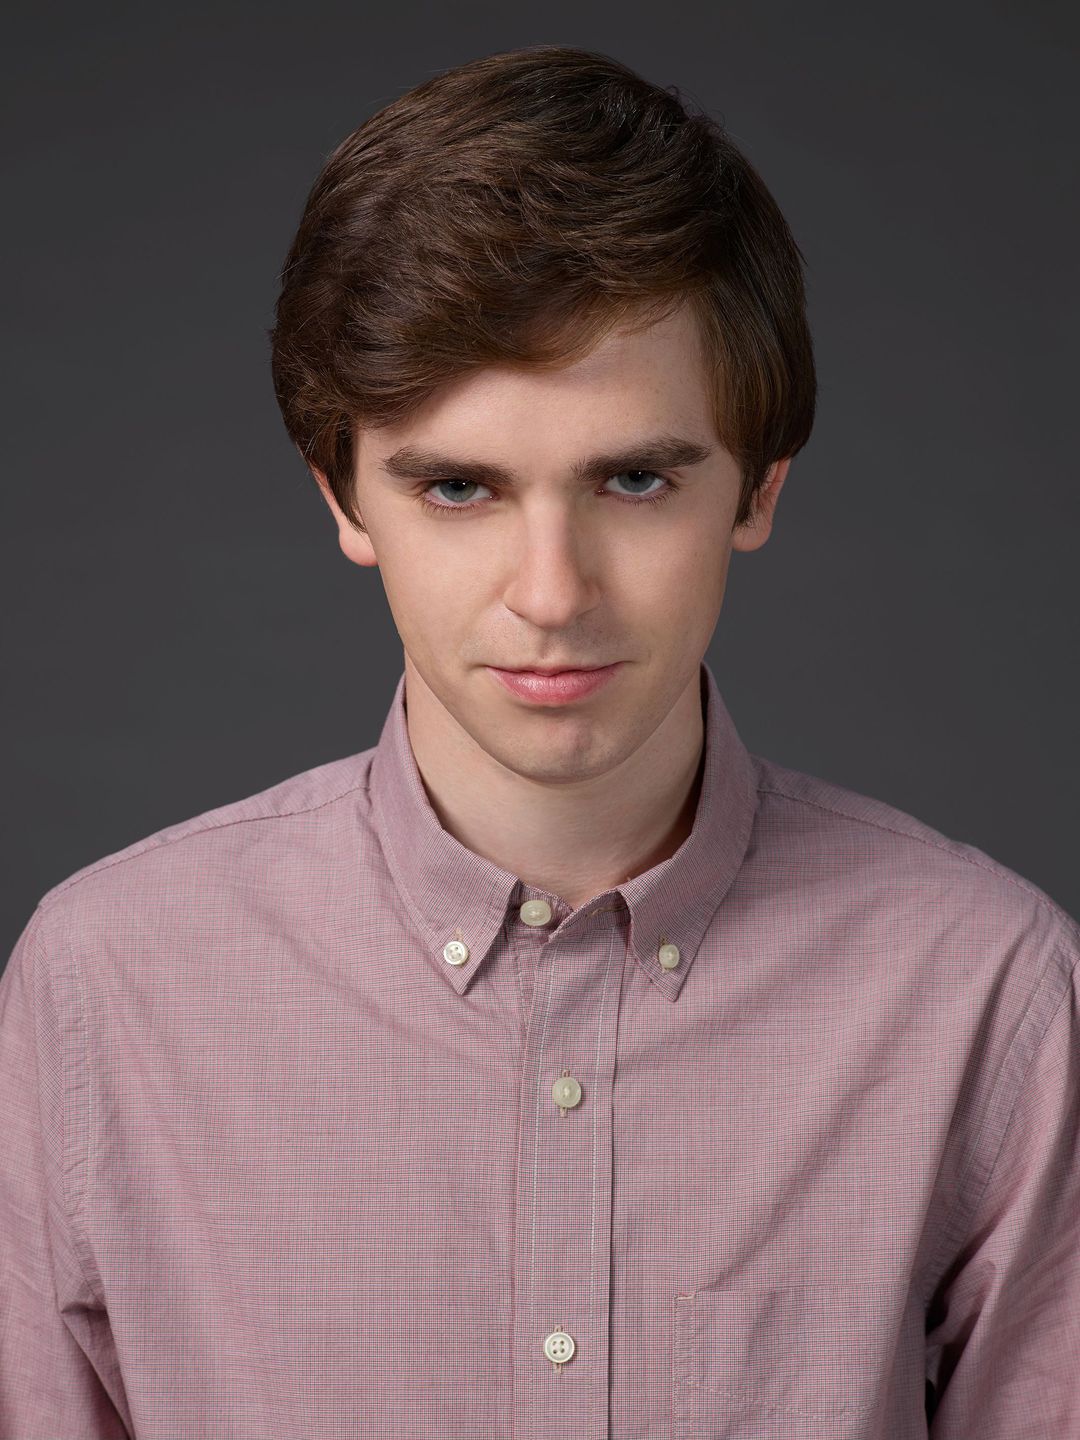 Freddie Highmore early childhood